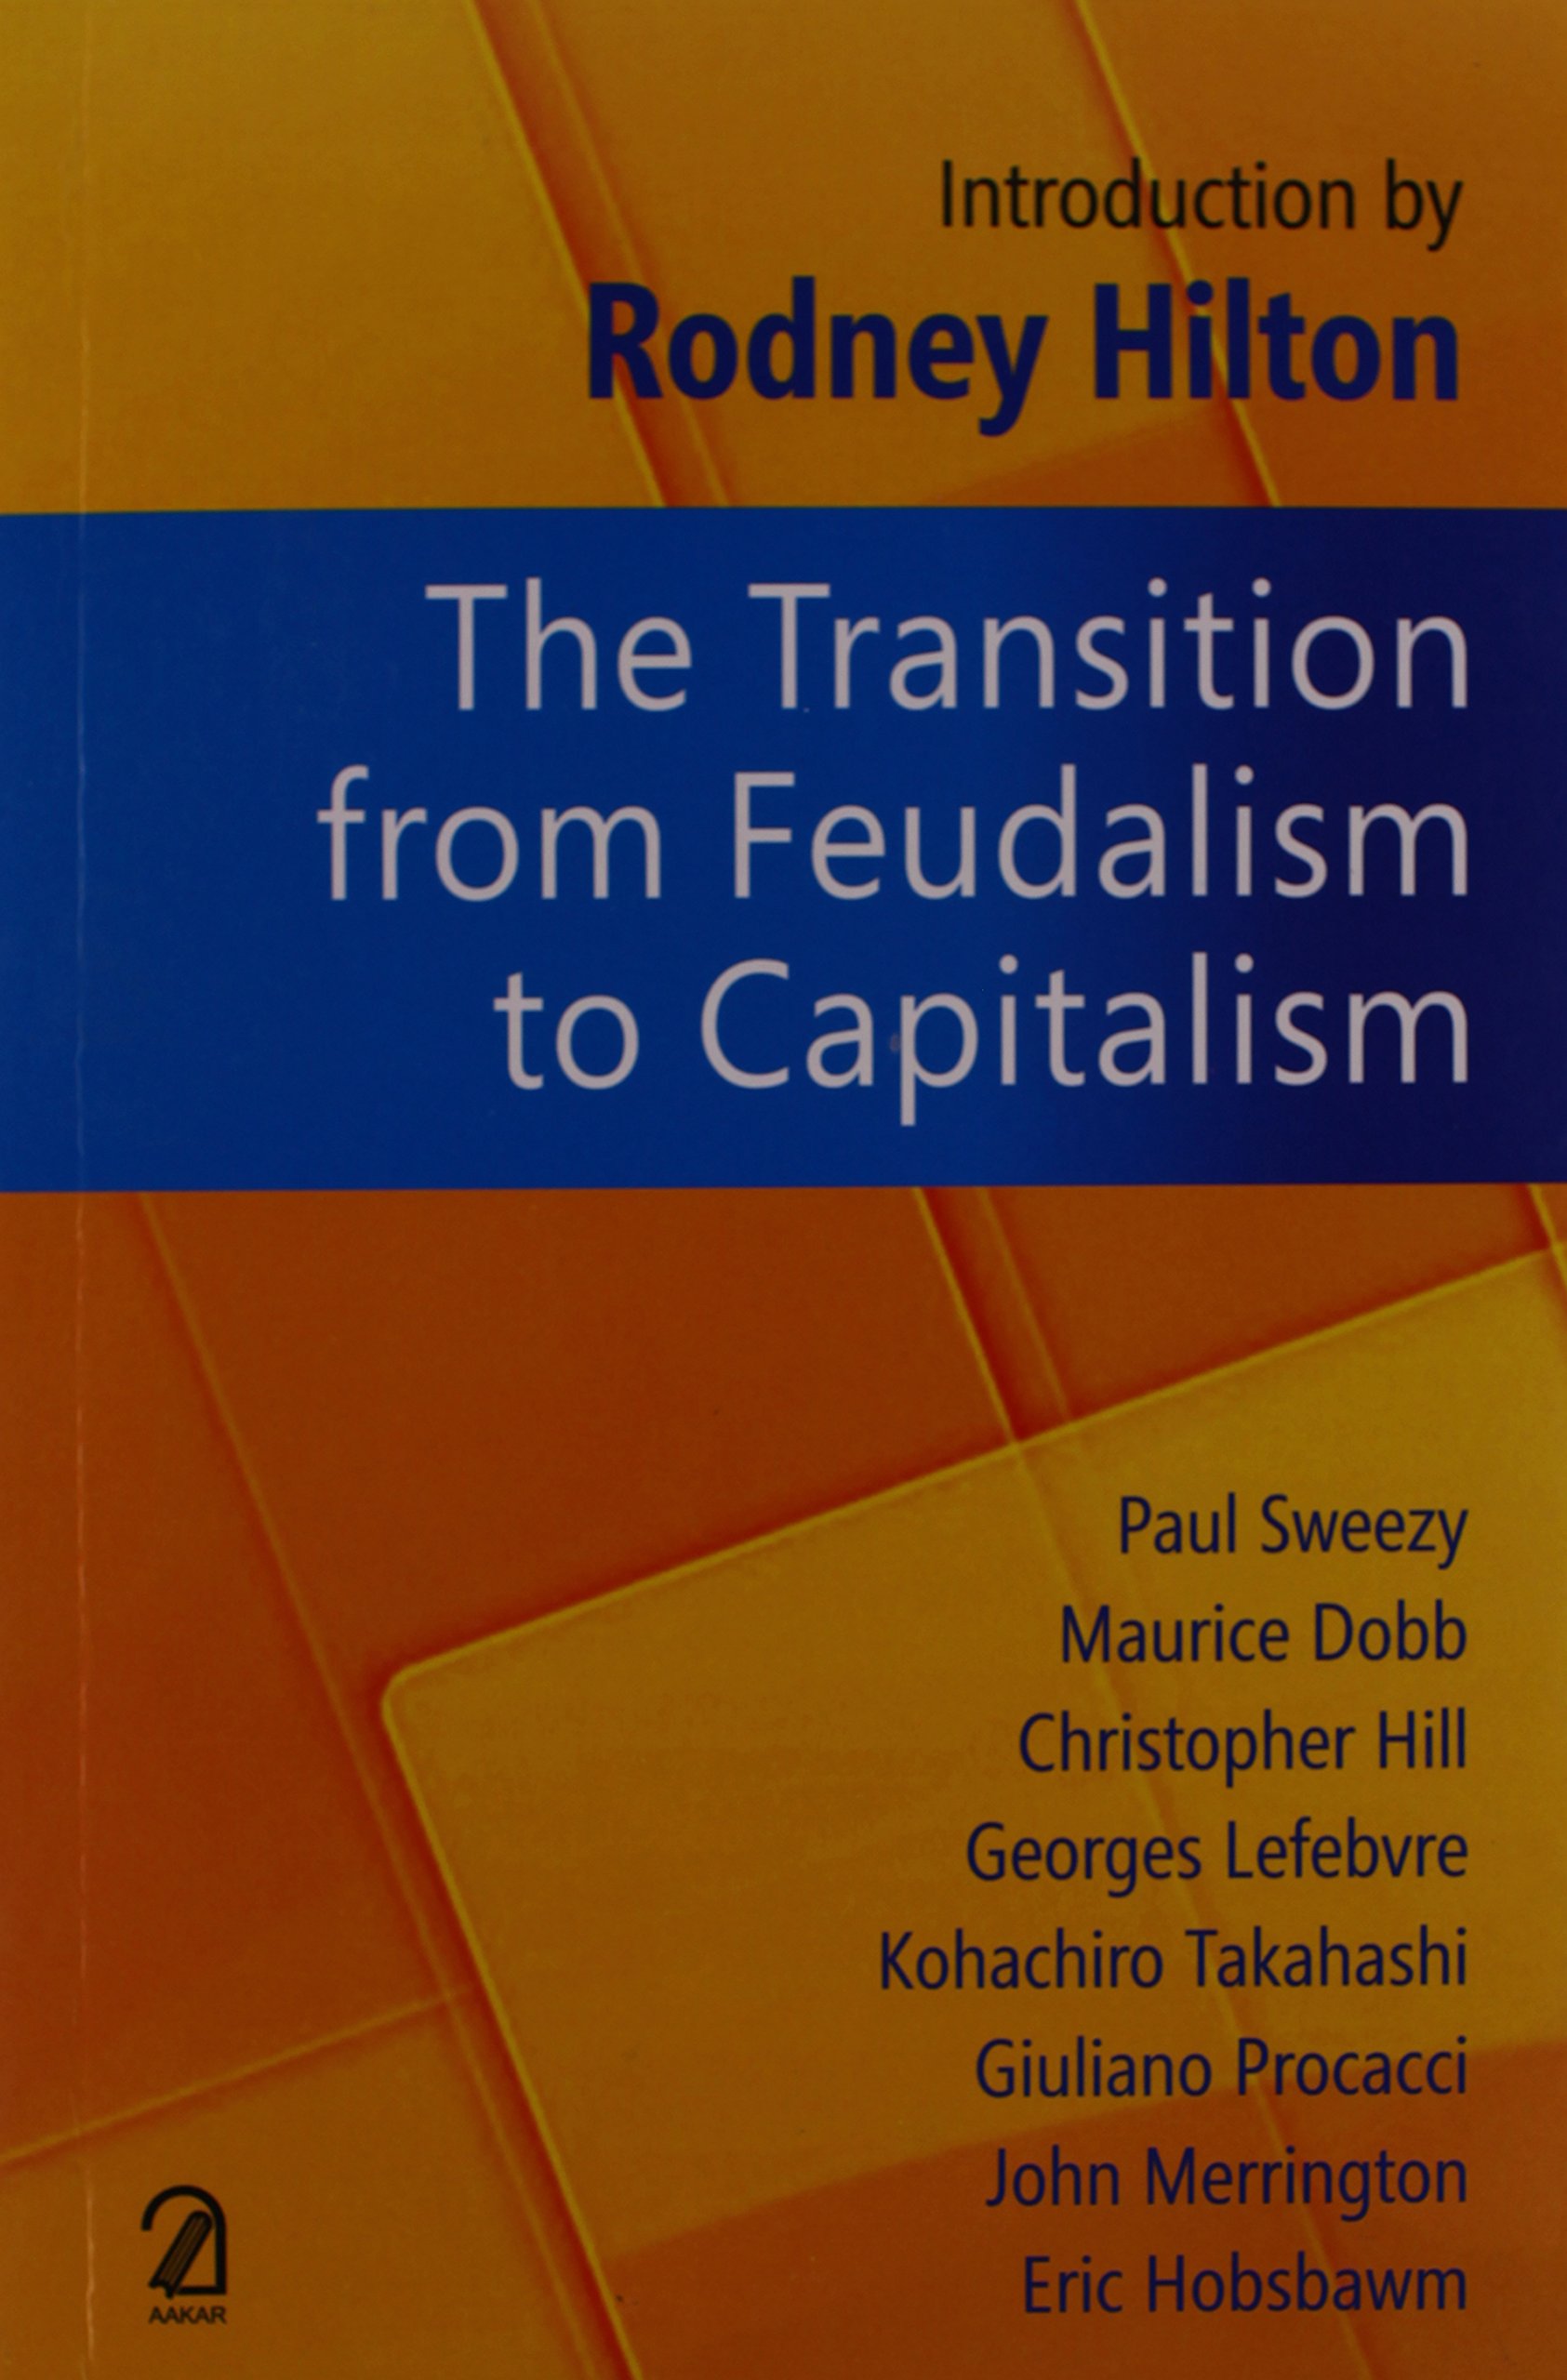 The transition from feudalism to capitalism